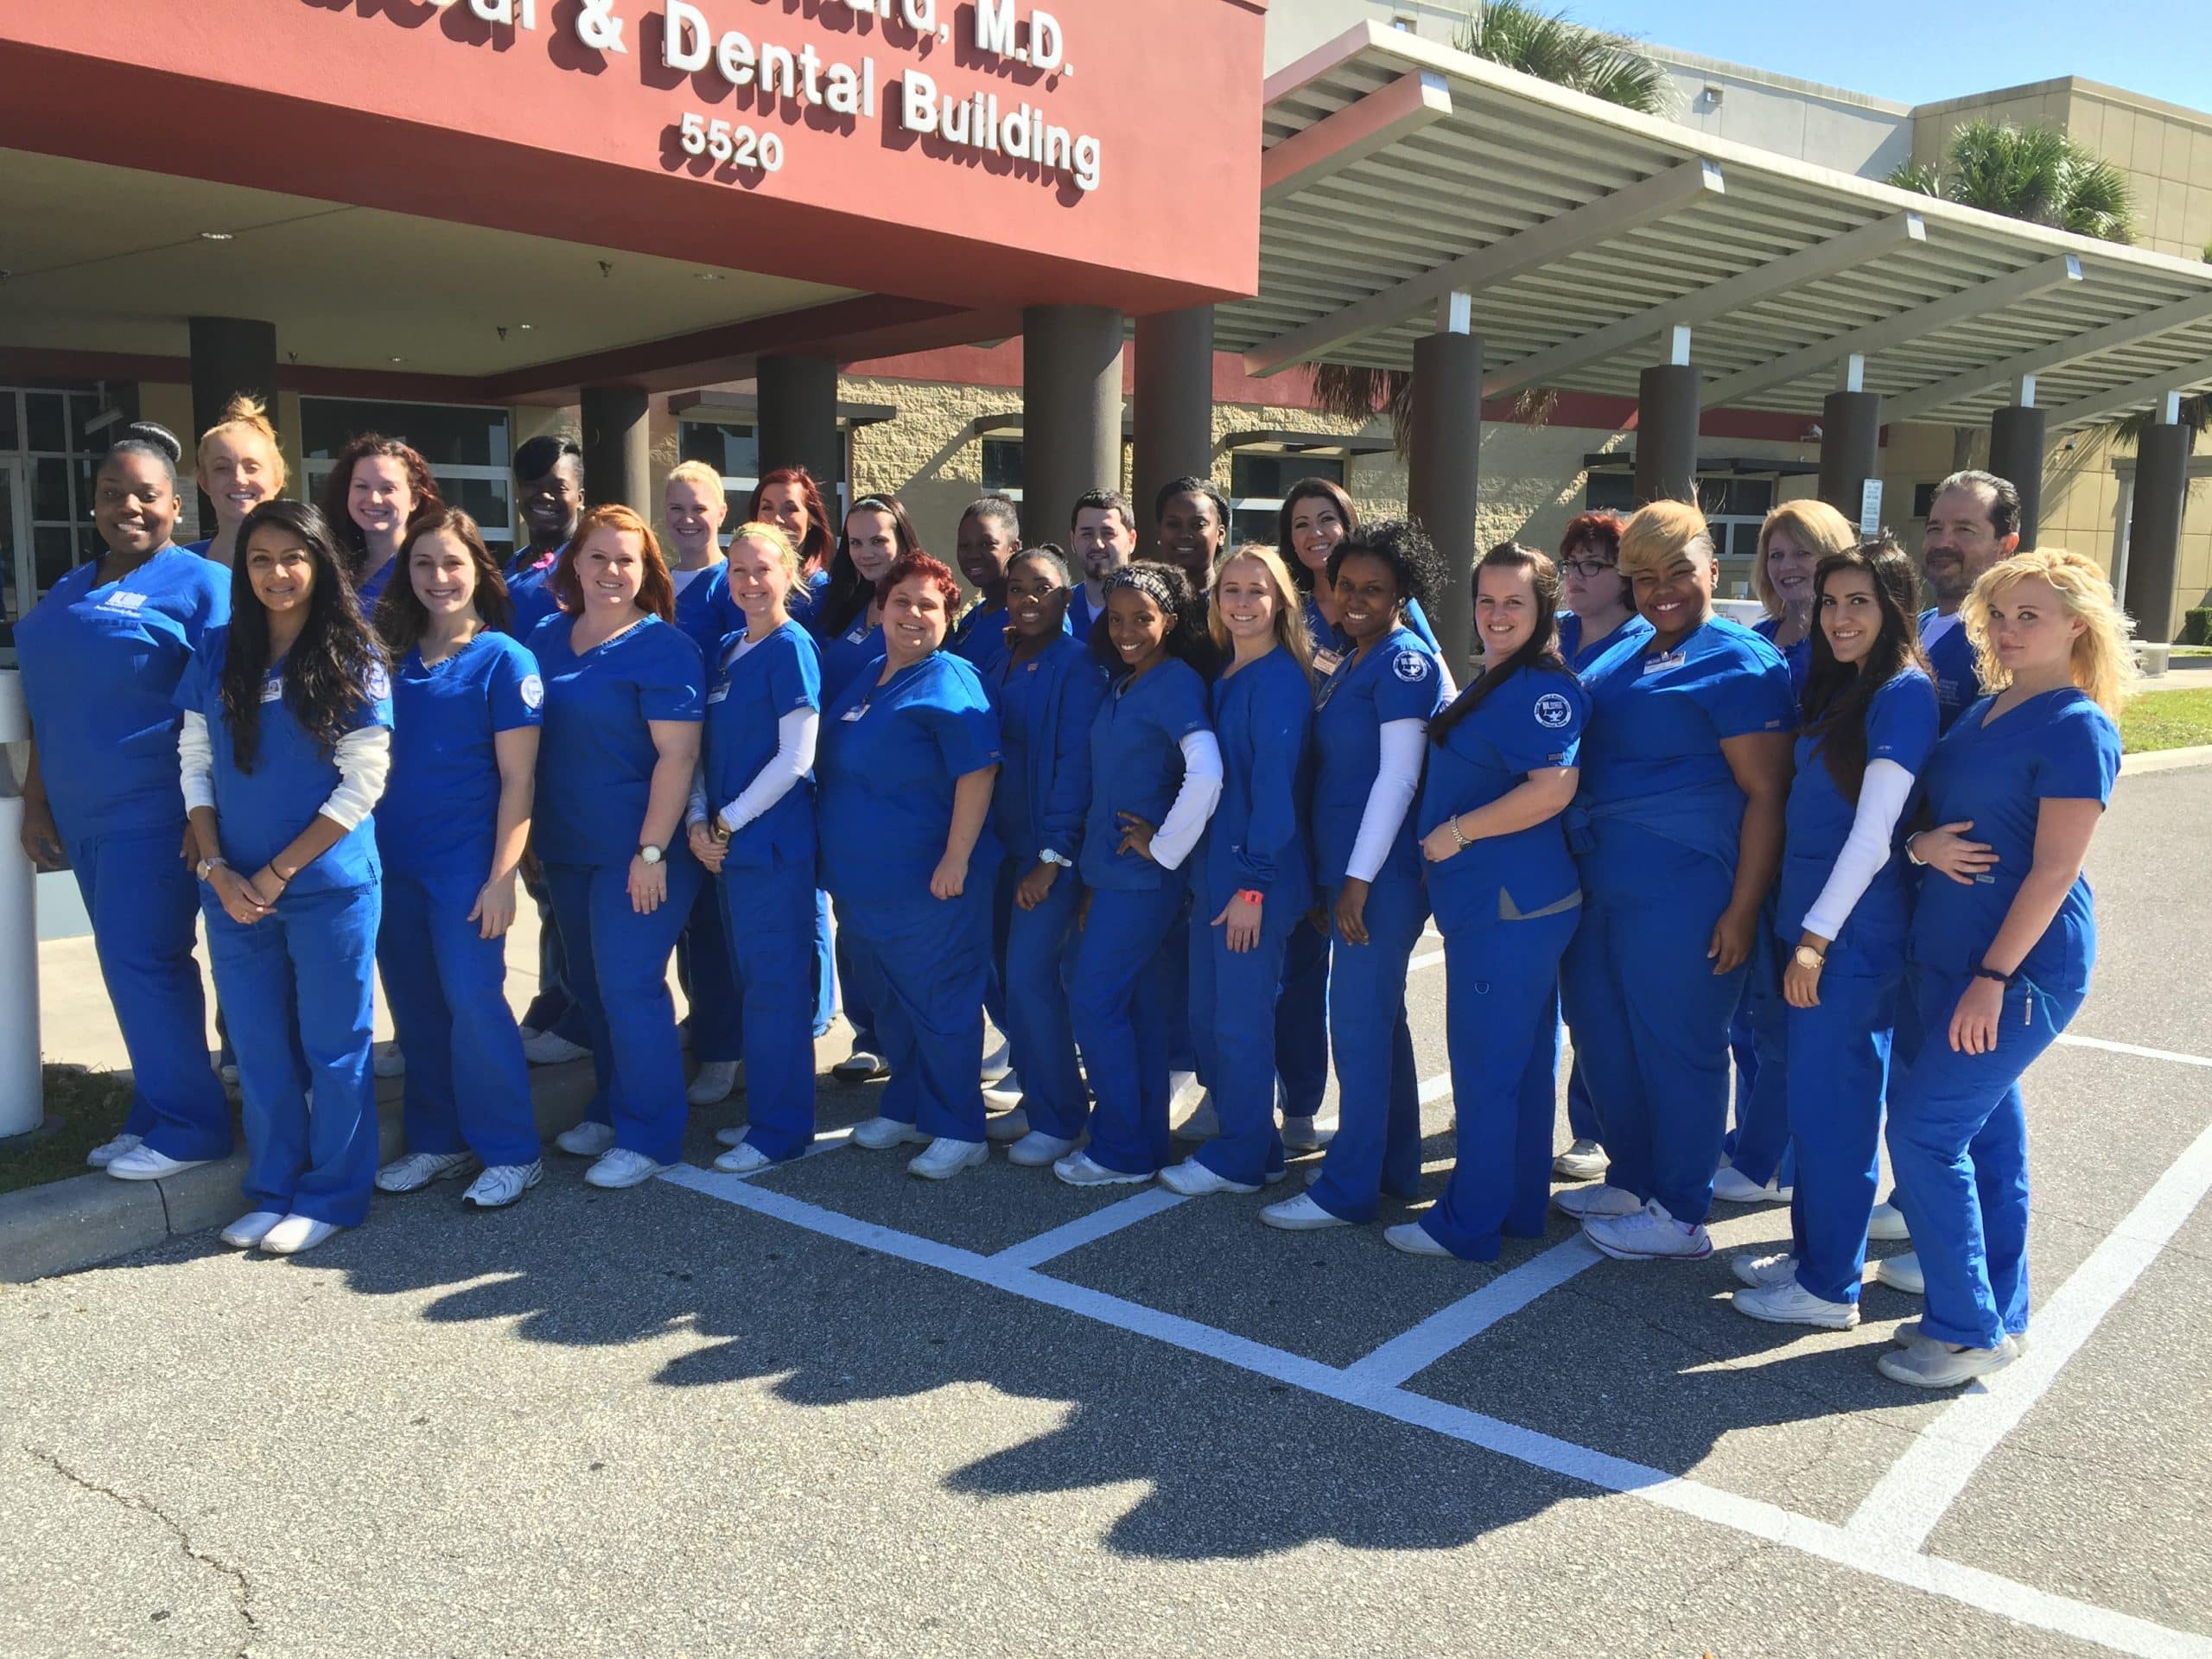 Congrats to our LPN Class of 2015!